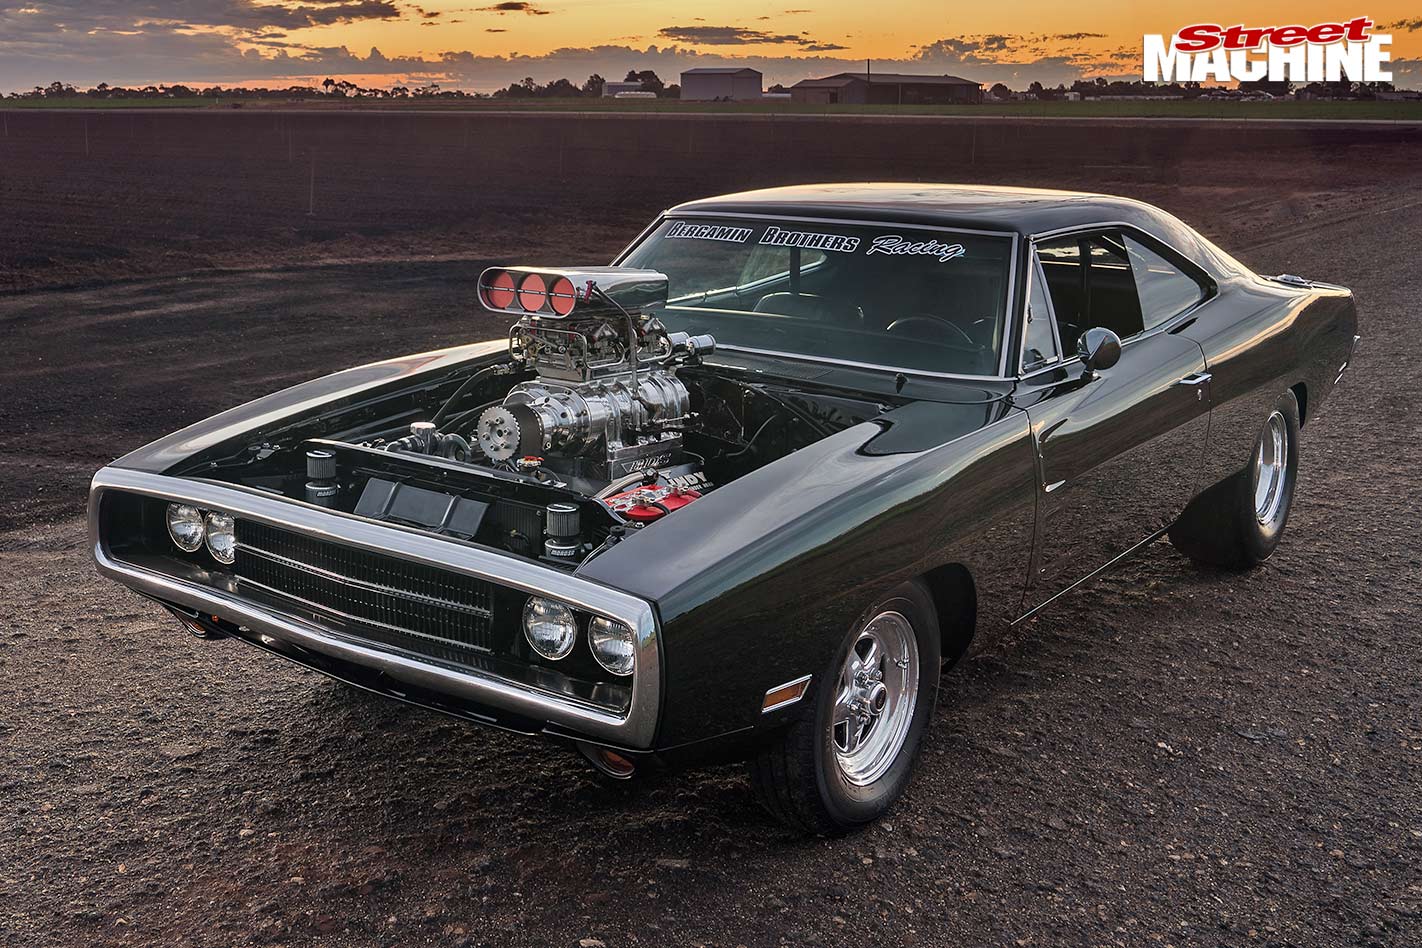 Blown big-block 'Fast & Furious' Dodge Charger tribute